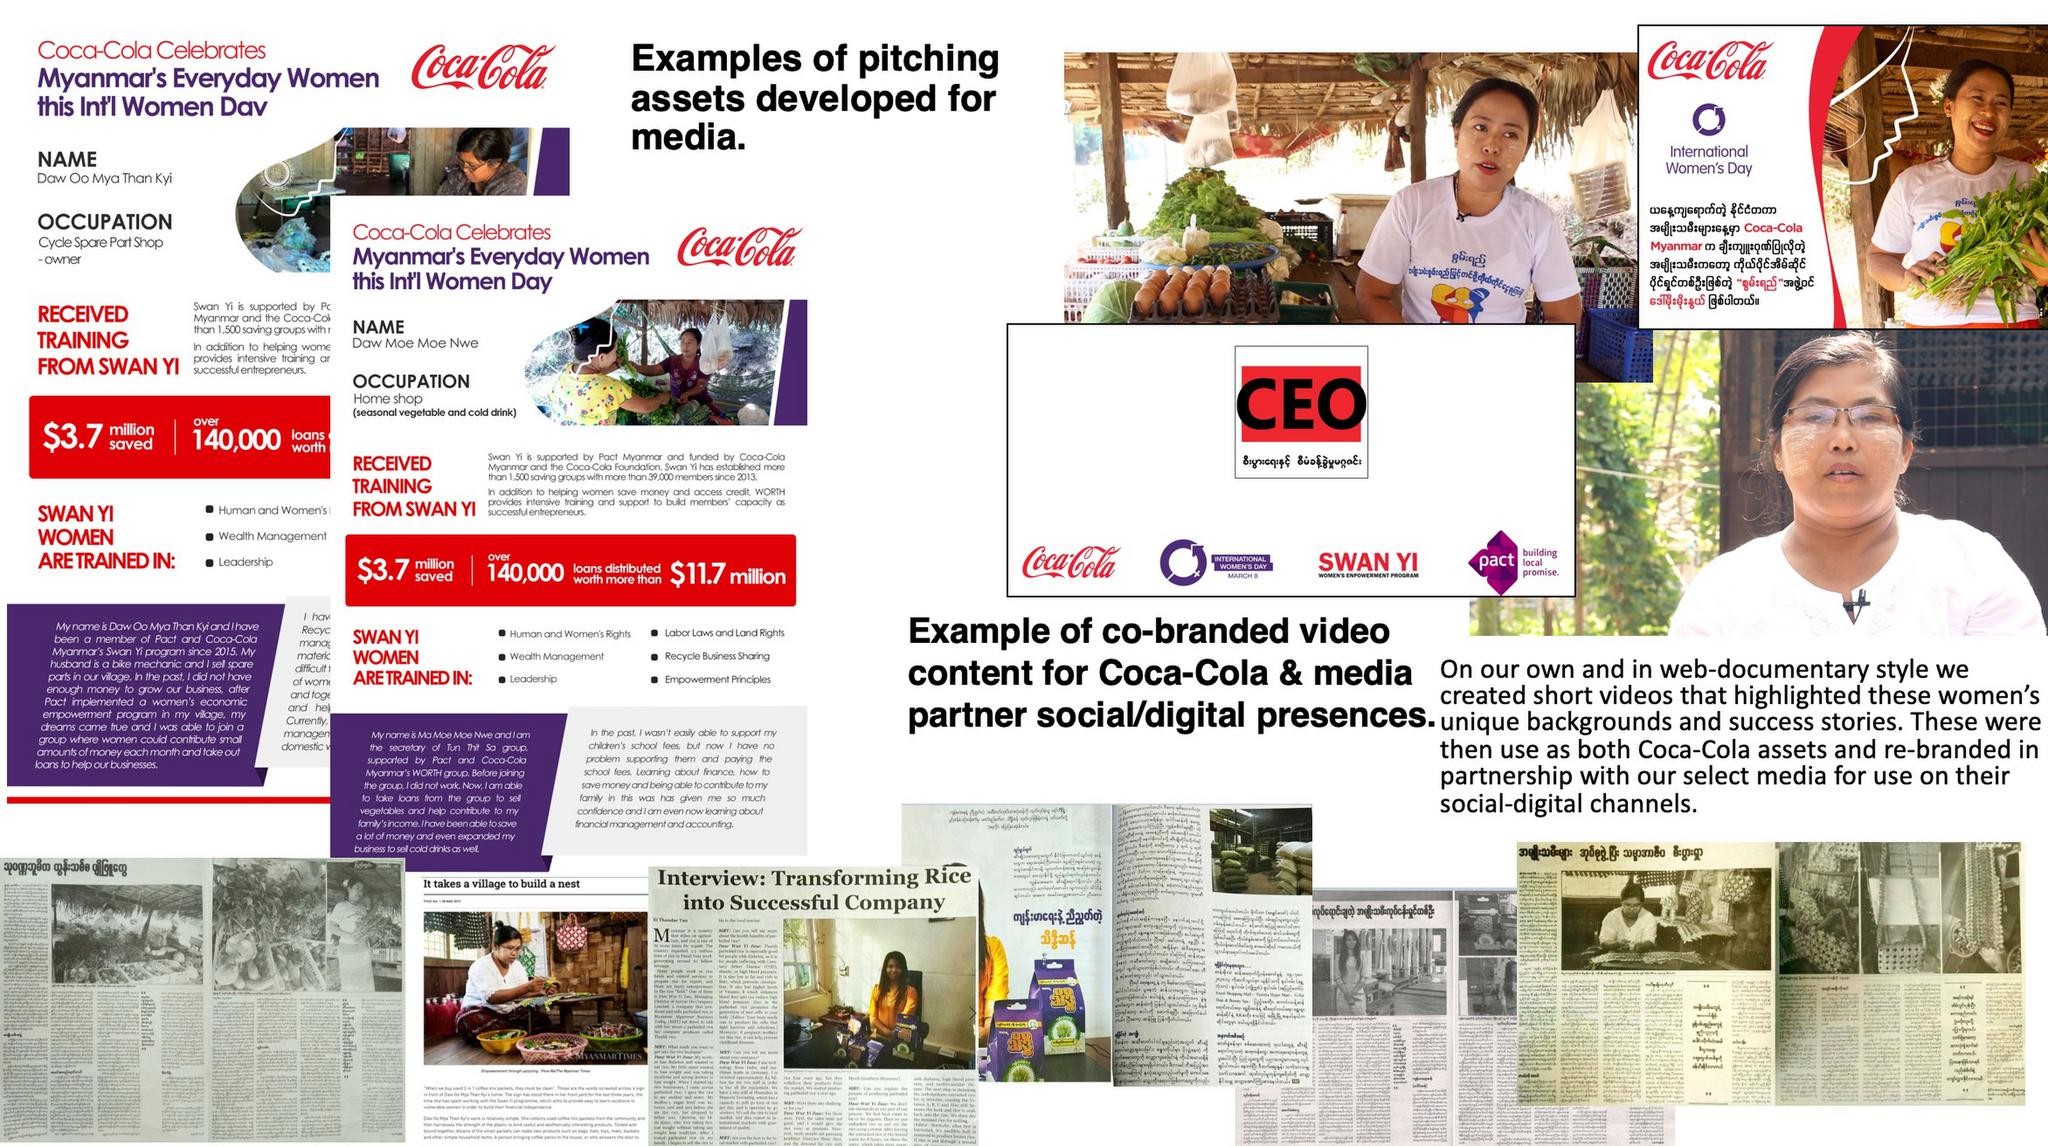 From High-So to All-So: Coca-Cola Celebrates Myanmar's Women